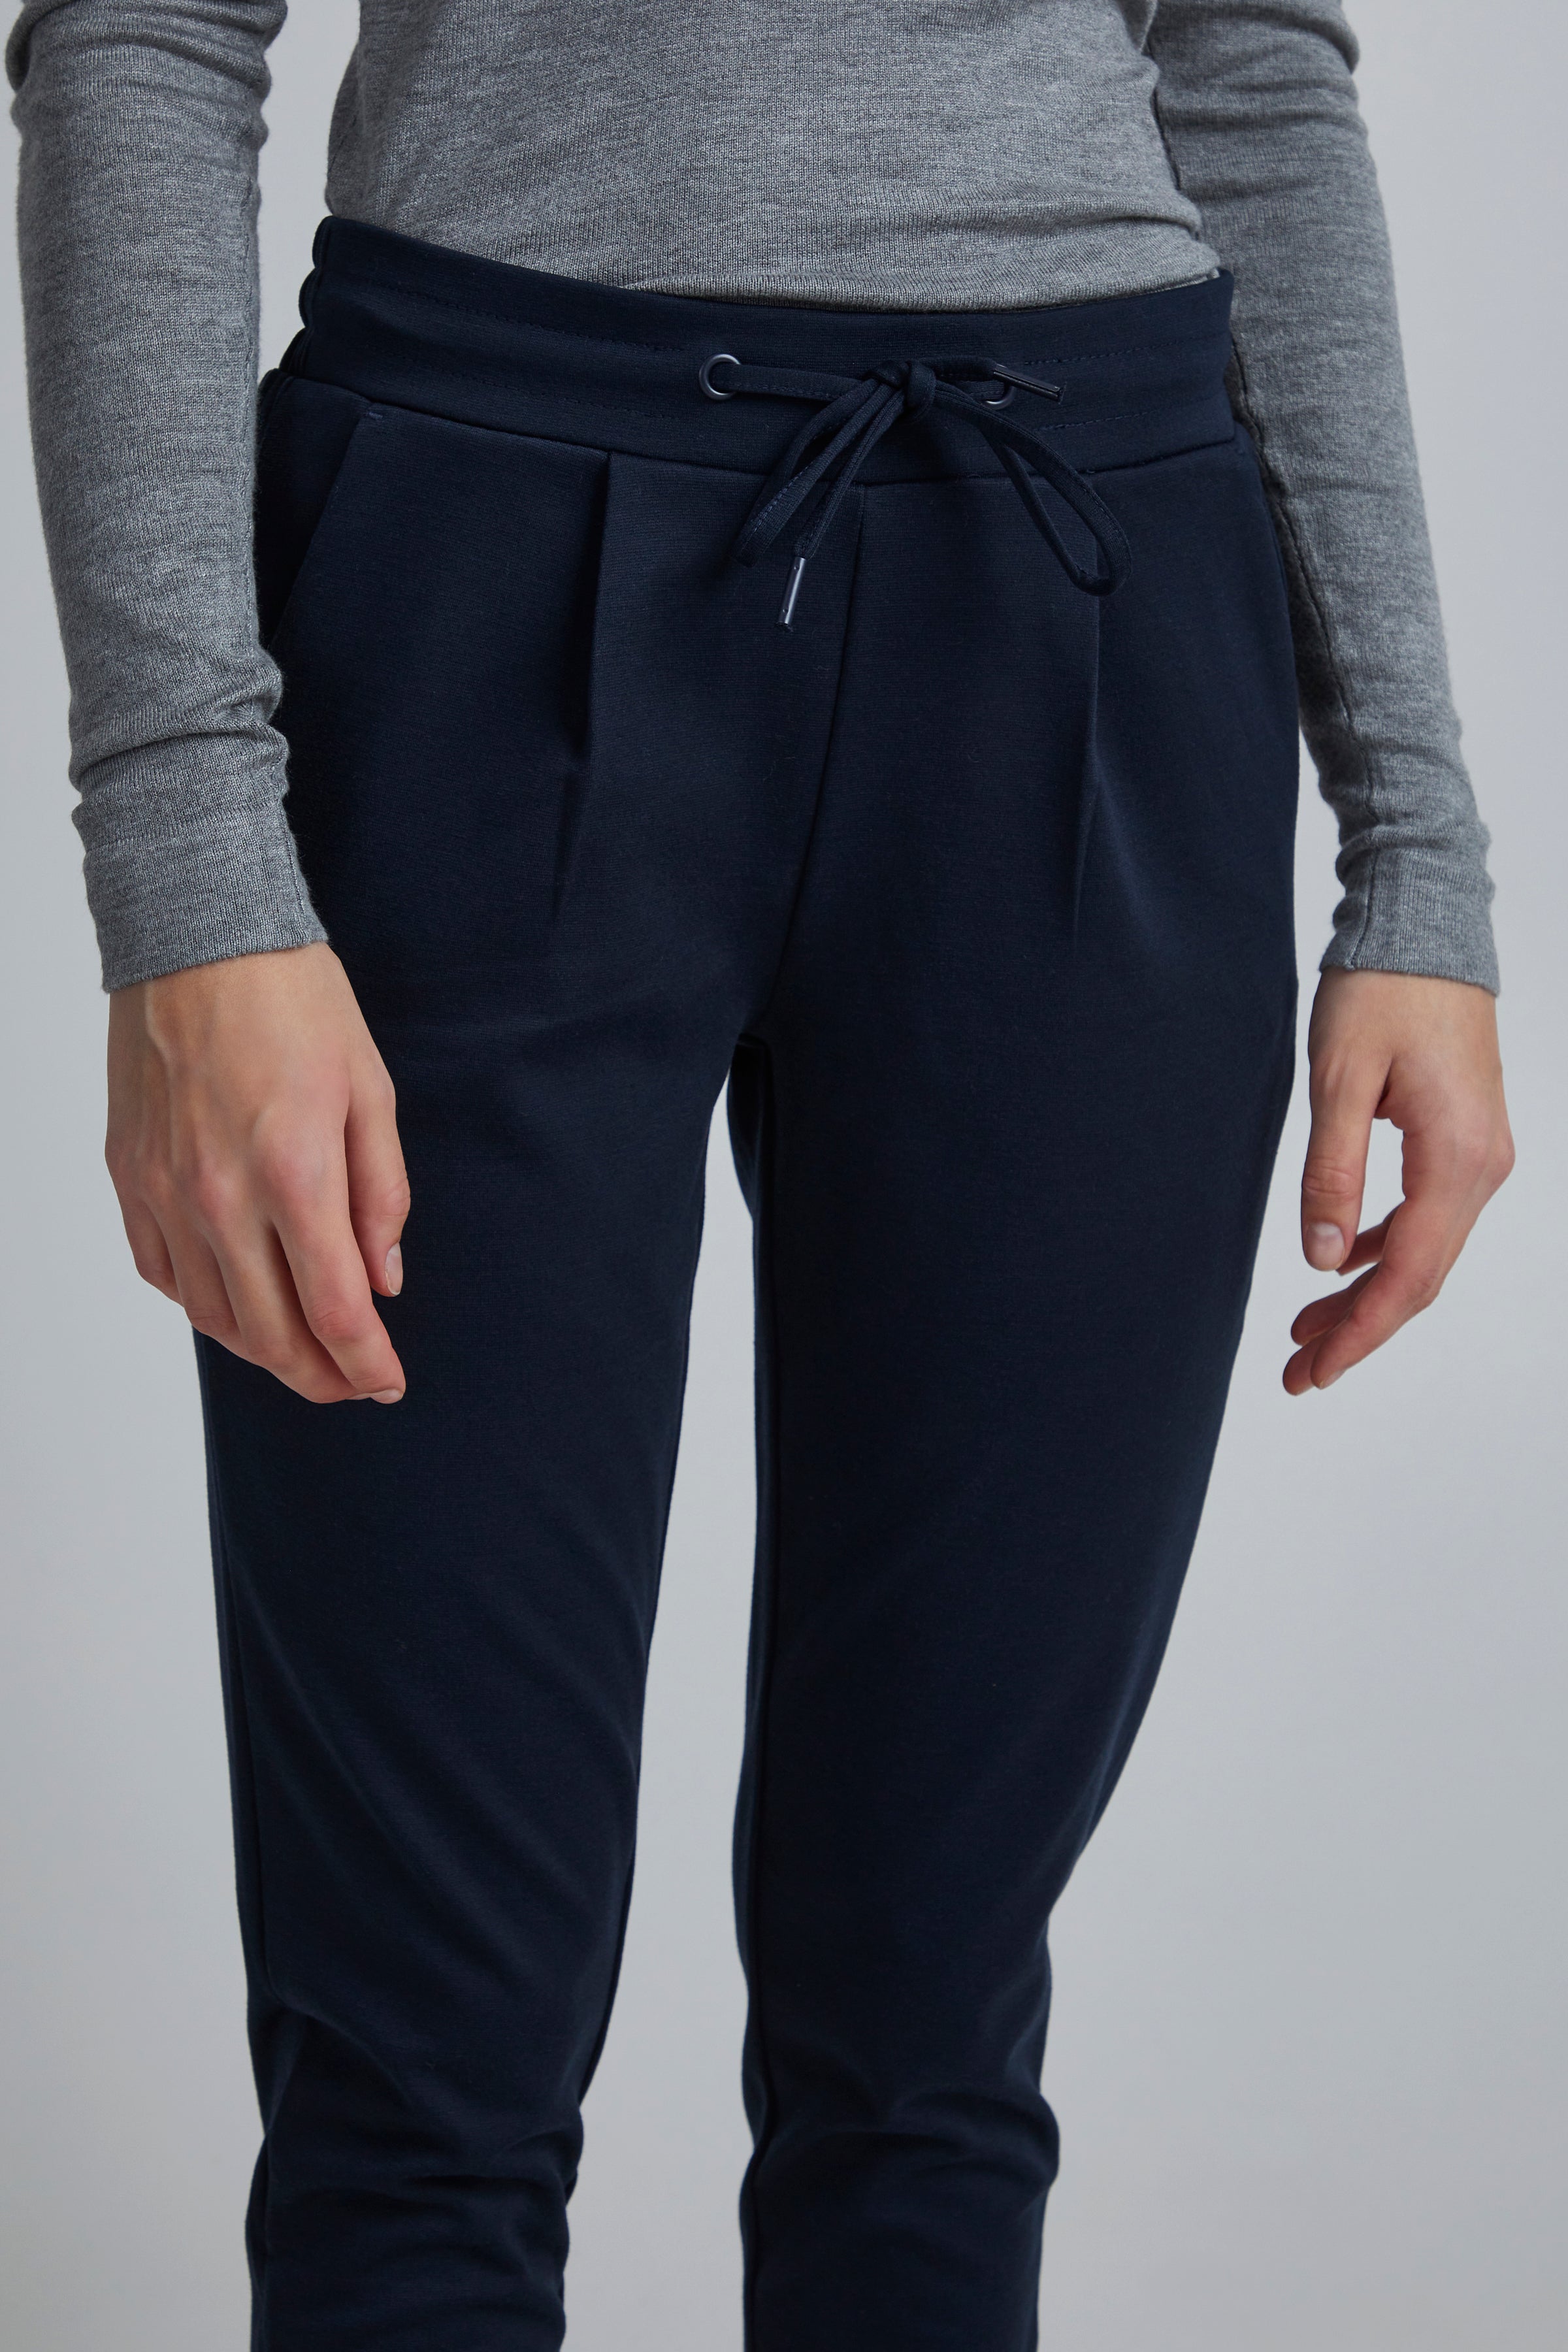 KATE CROPPED JERSEY JOGGER (NAVY)